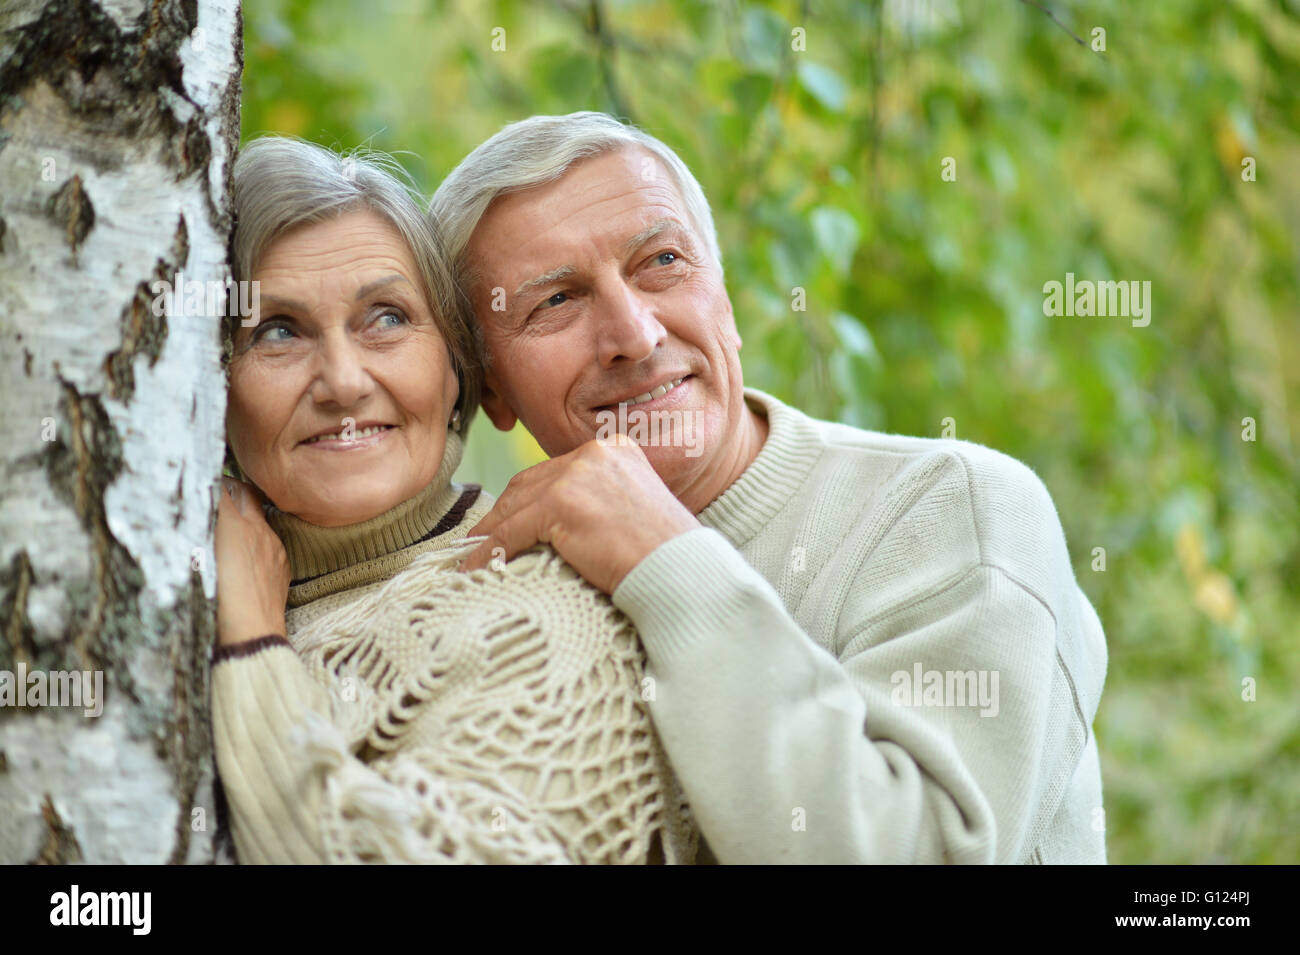 couple in summer park Stock Photo